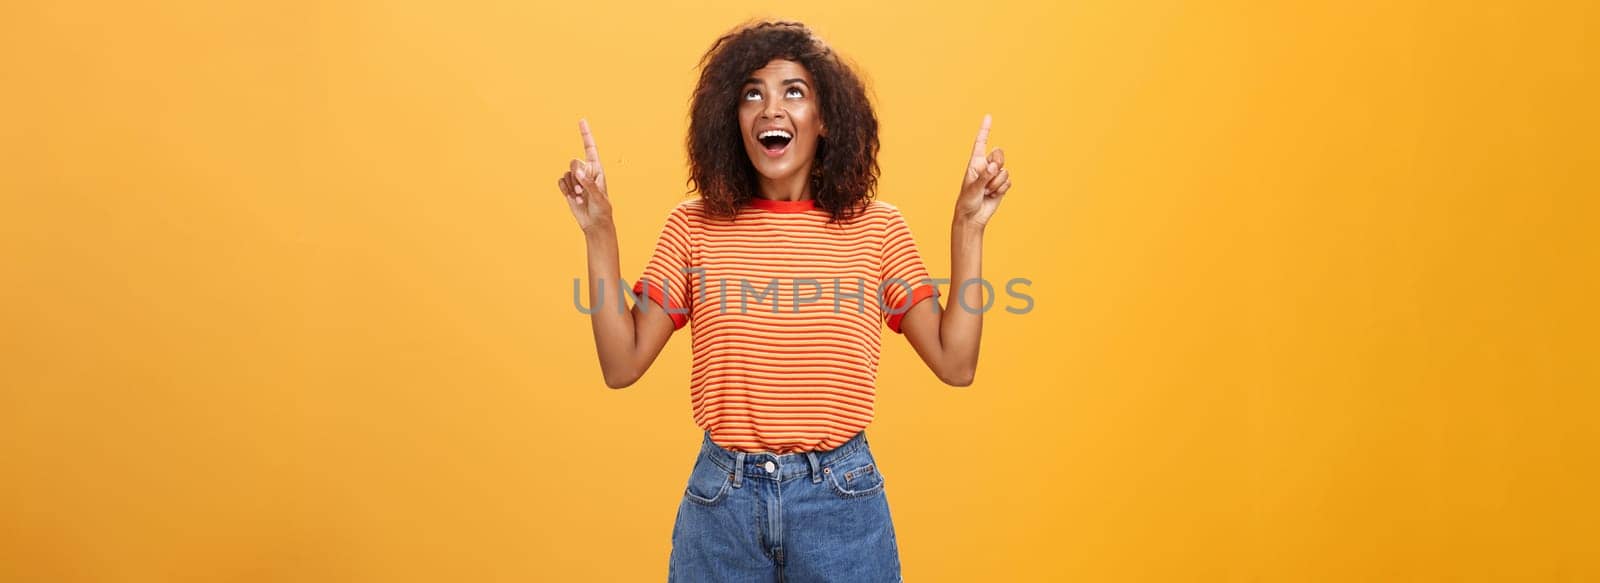 Fascinated impressed and amused good-looking charming African-American woman with afro hairstyle in trendy t-shirt and denim shorts pointing and looking up with interested look over orange wall. Lifestyle.